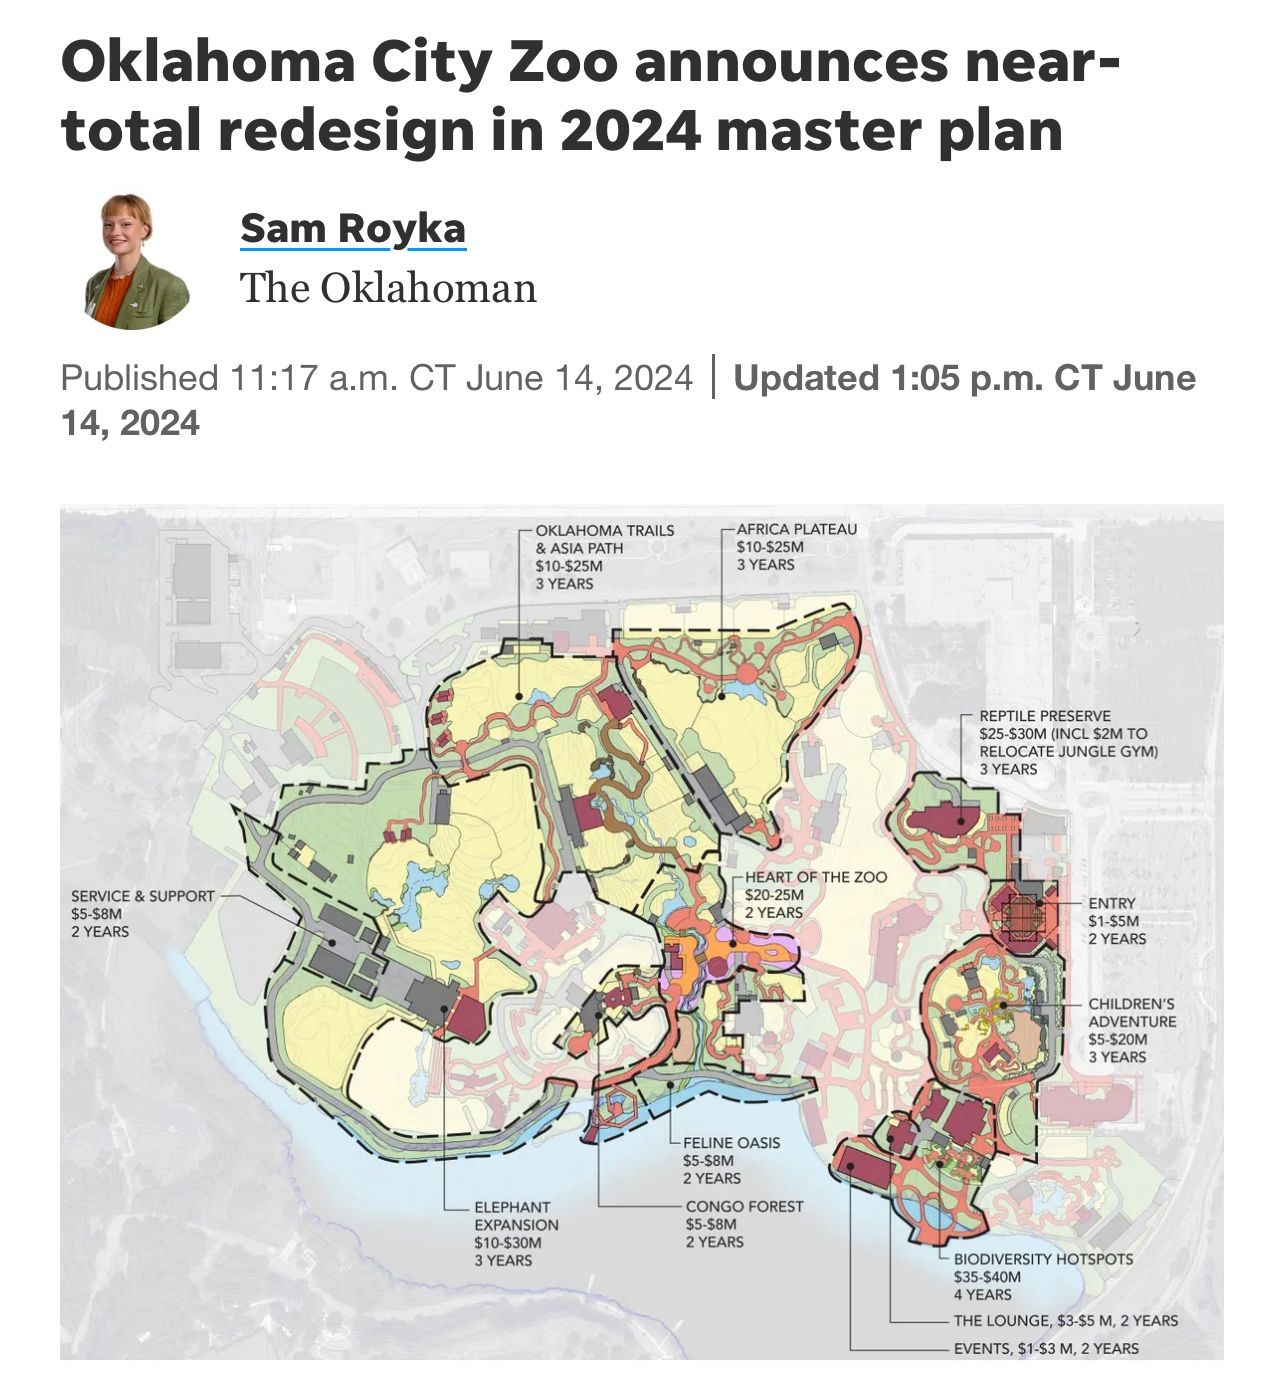 Oklahoma City Zoo Announces Near-Total Redesign in 2024 Master Plan ...